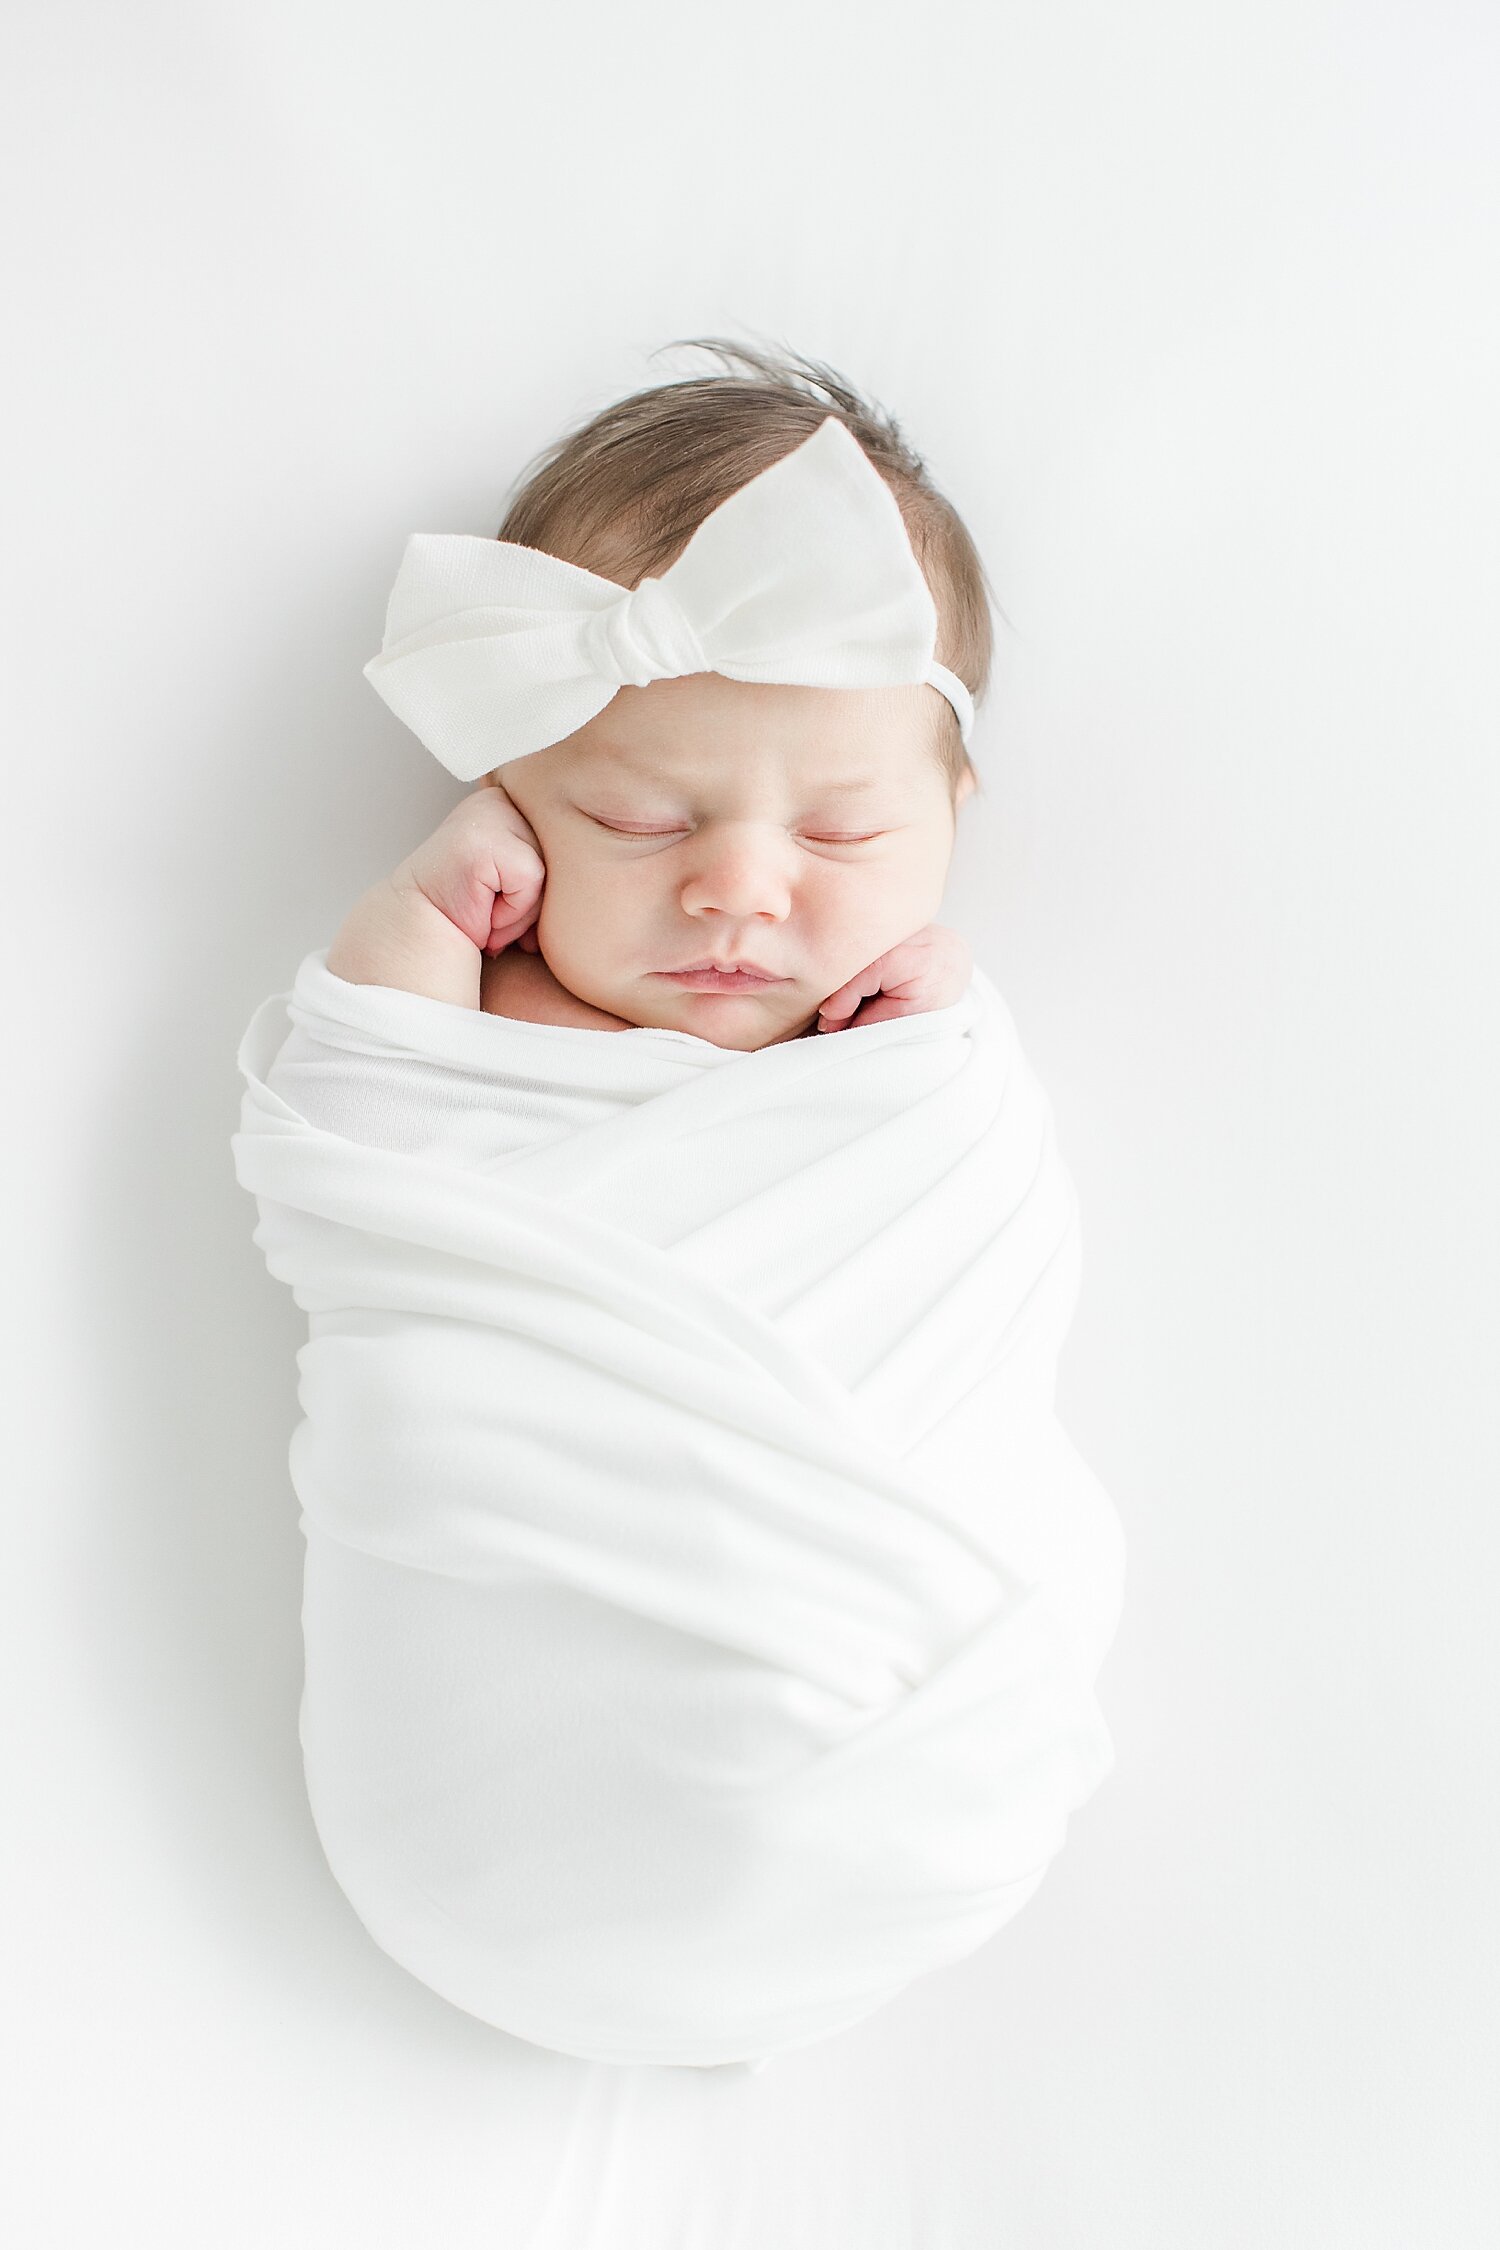 Baby girl sleeping and swaddled for newborn photos with Kristin Wood Photography.